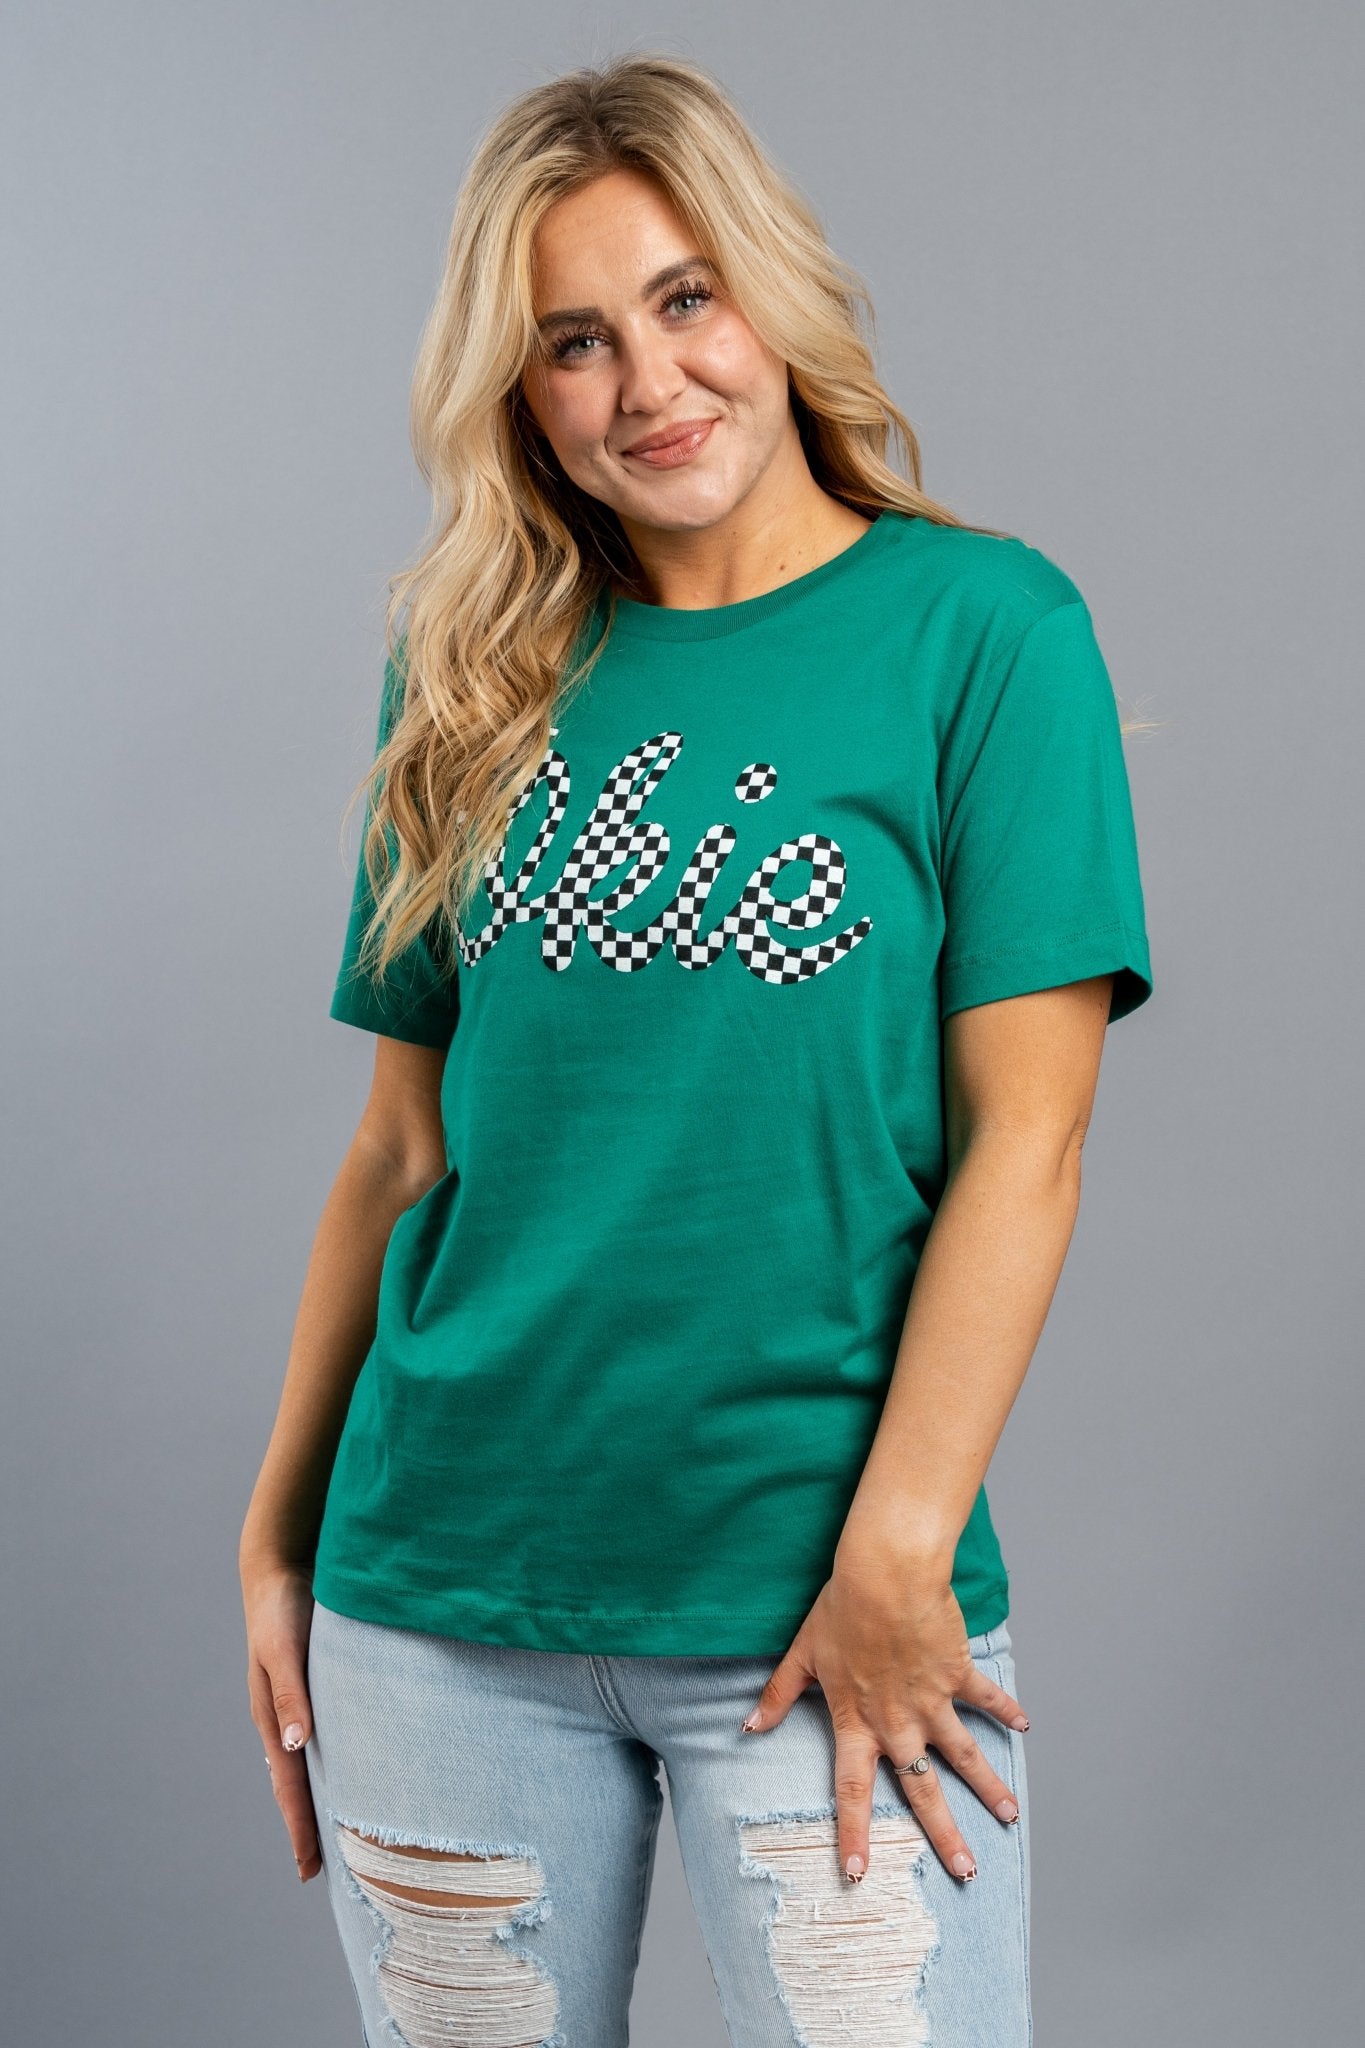 Okie checkered unisex short sleeve t-shirt green - Cute T-shirts - Trendy Graphic T-Shirts at Lush Fashion Lounge Boutique in Oklahoma City